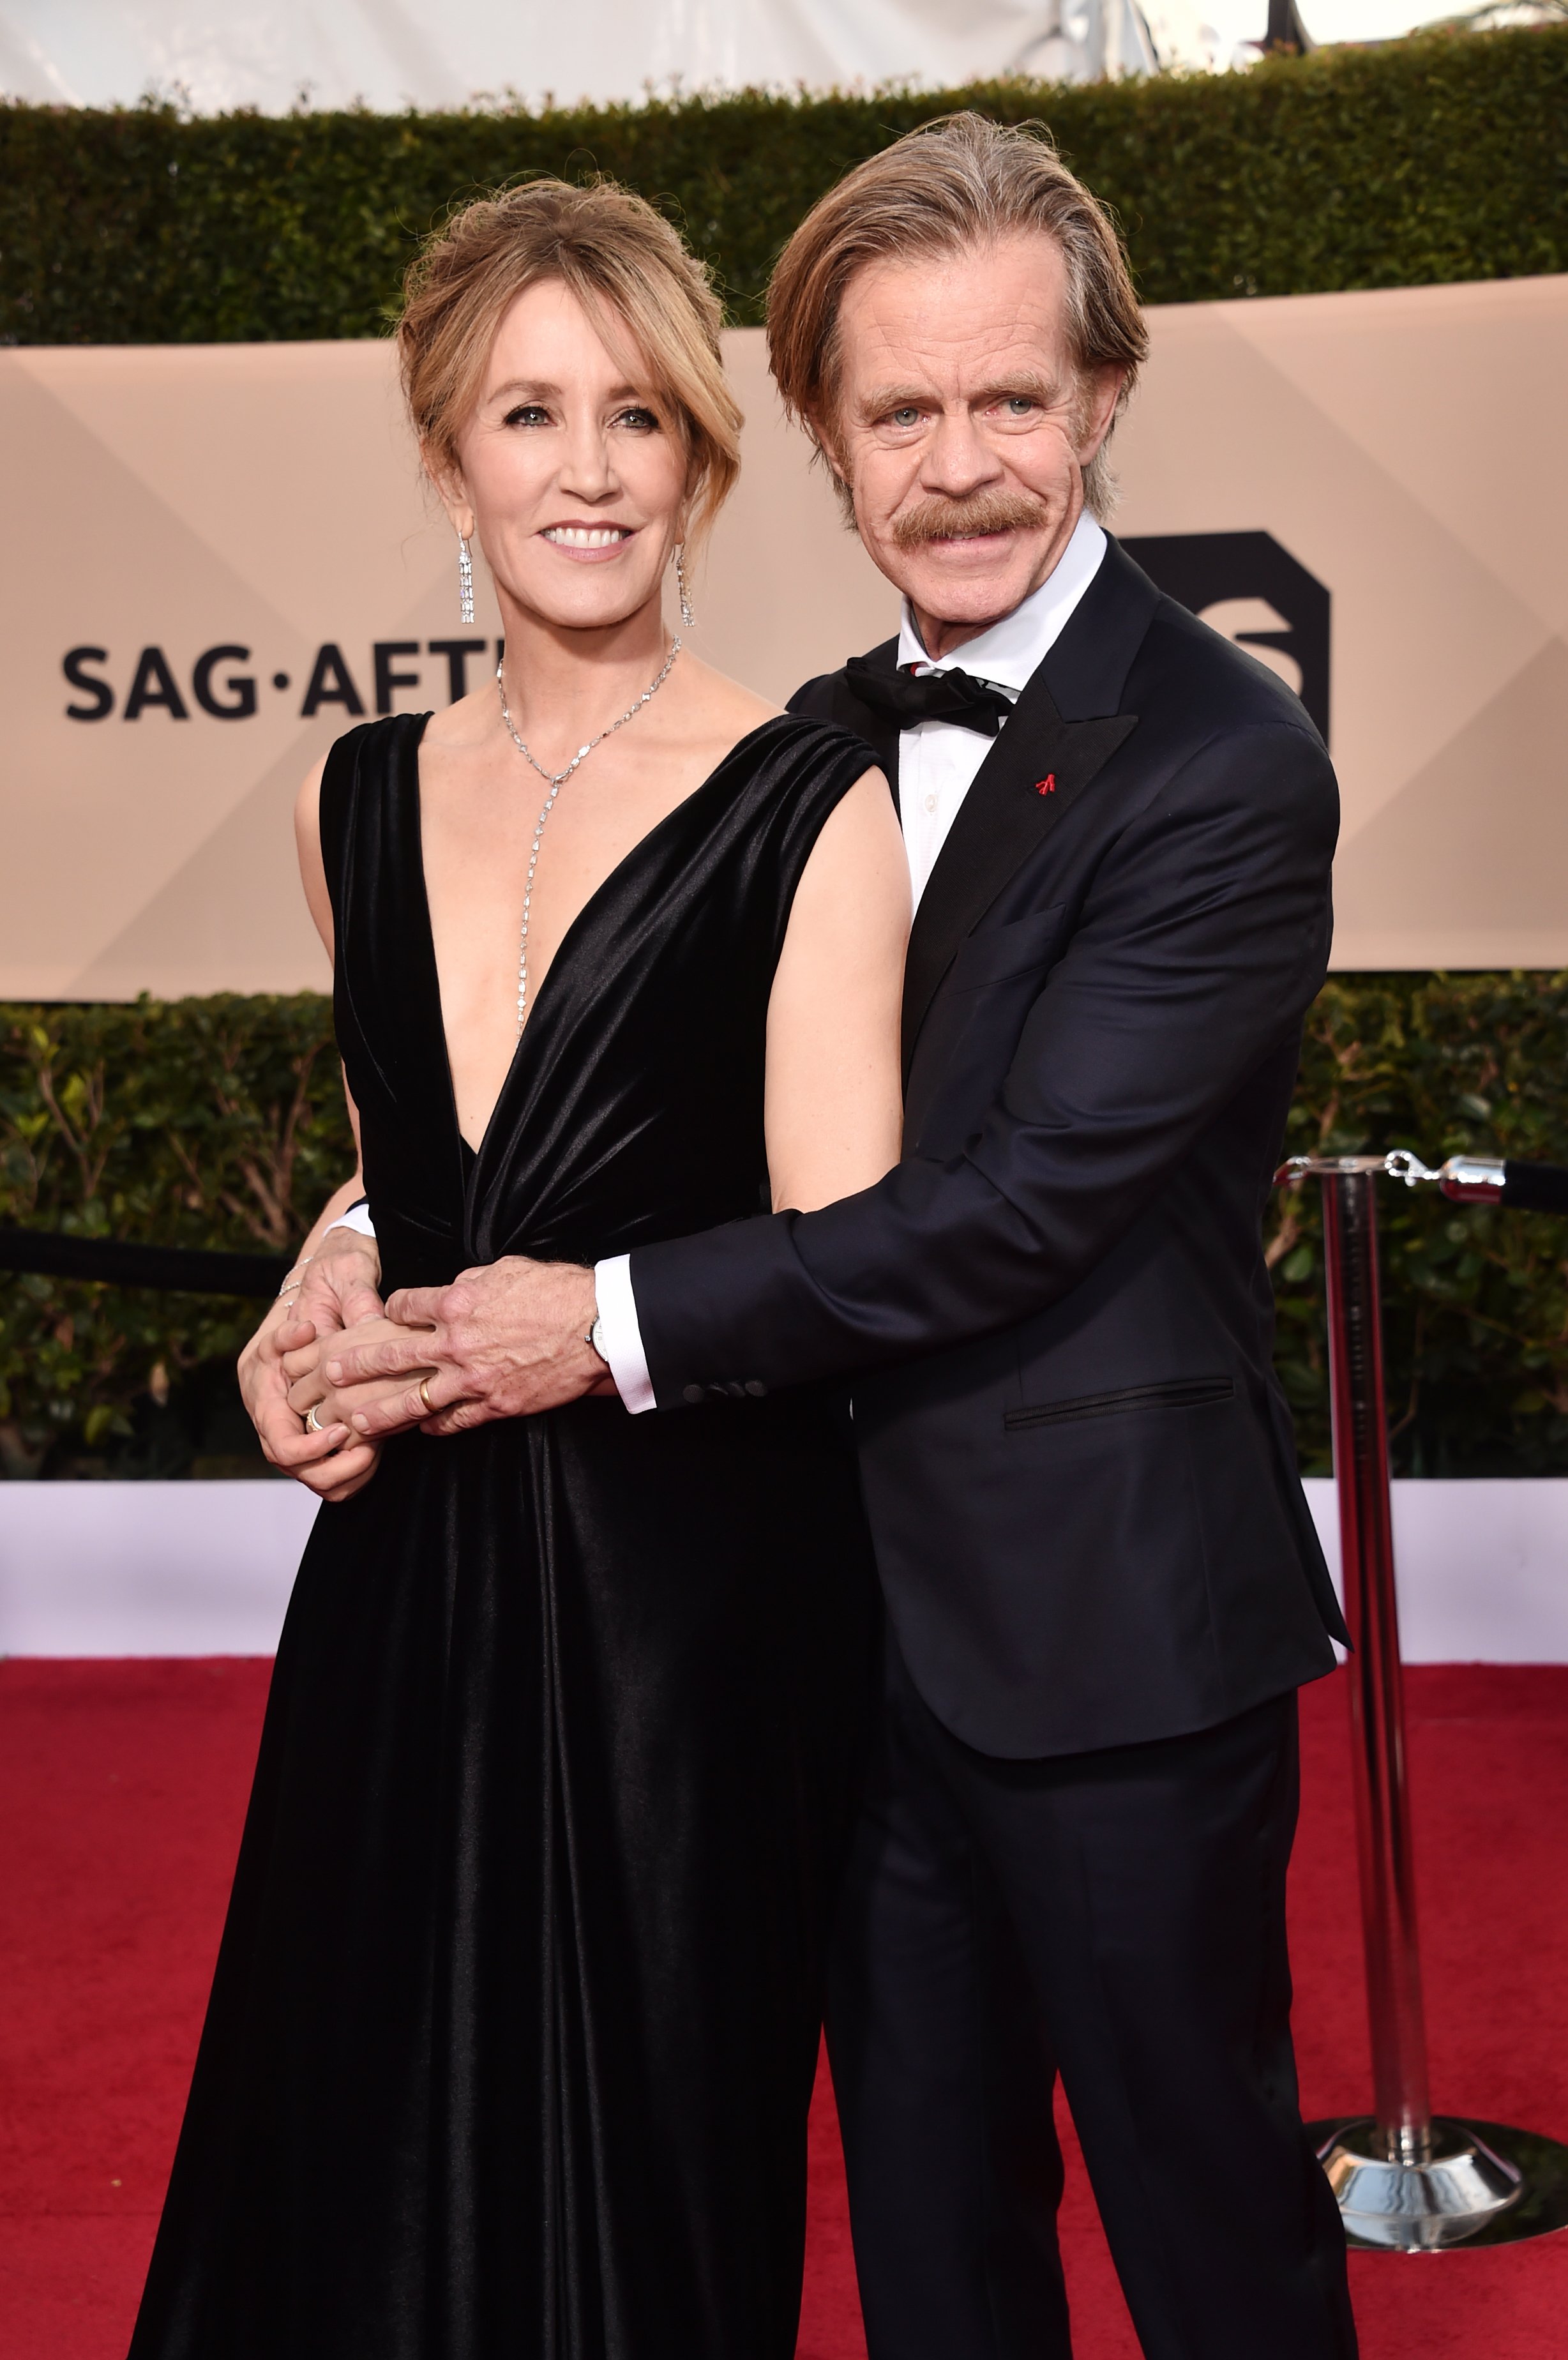 Felicity Huffman & William H. Macy at the 24th Annual Screen Actors Guild Awards on Jan. 21, 2018 in California | Photo: Getty Images